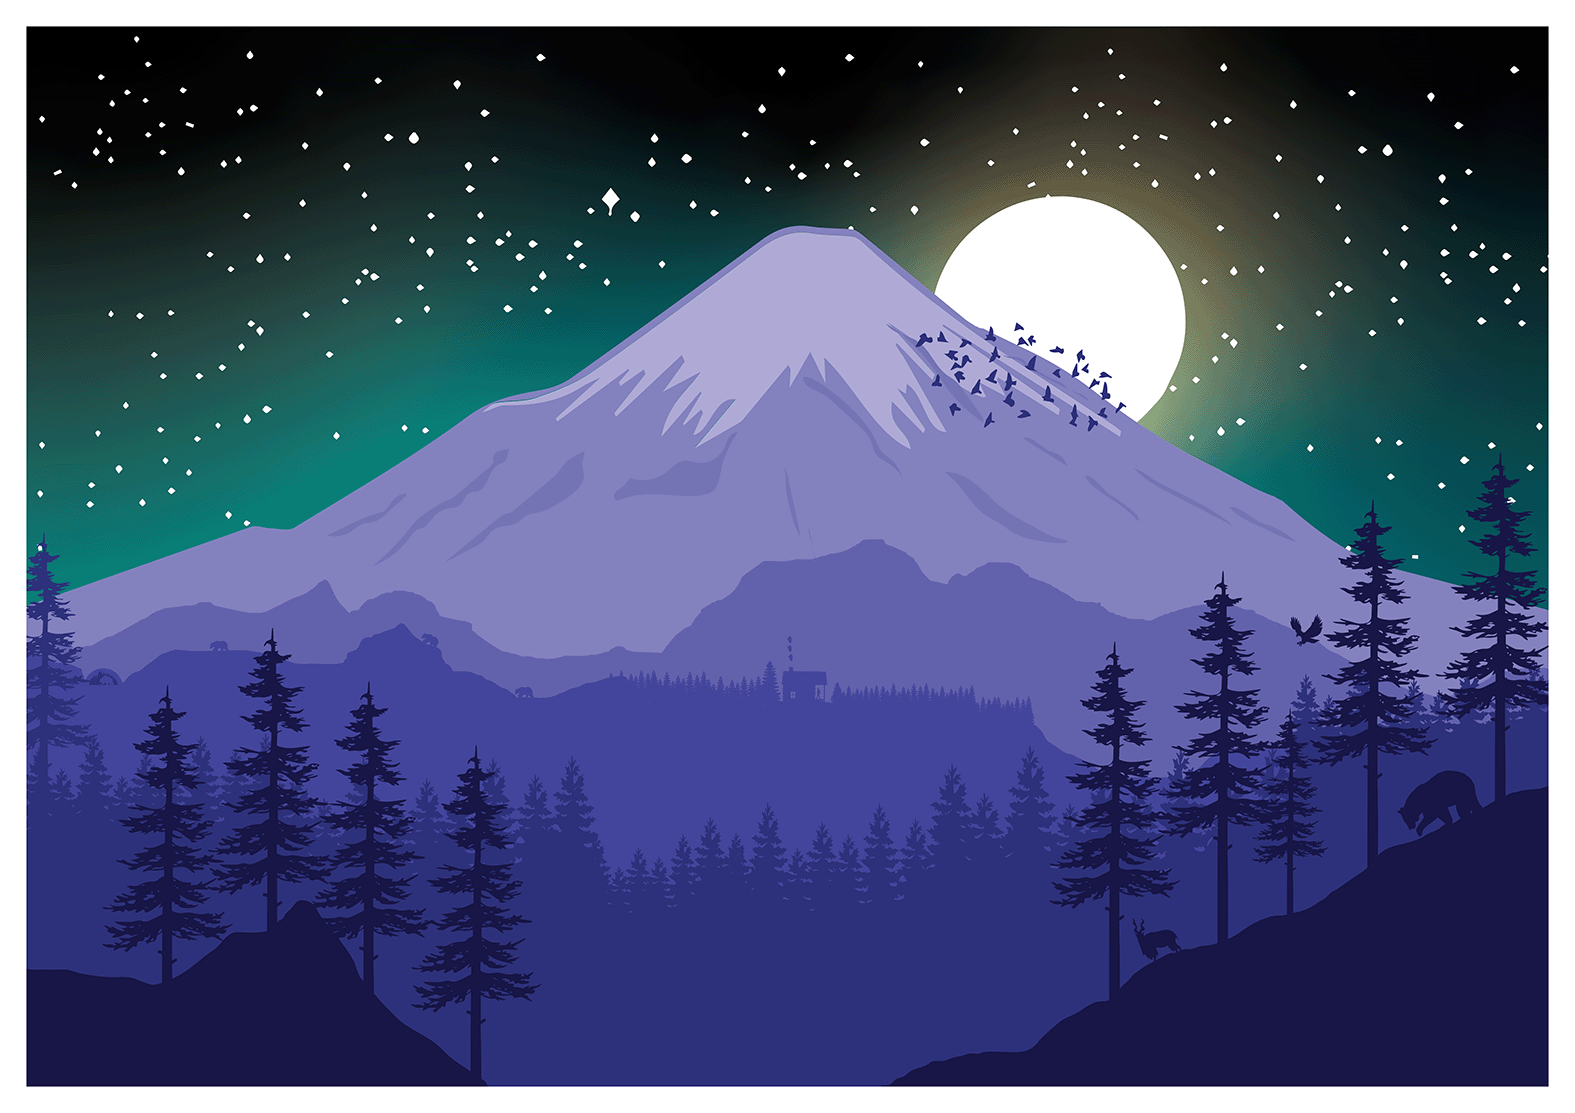 Painting of a mountain with moon rising behind it and pine trees in the foreground